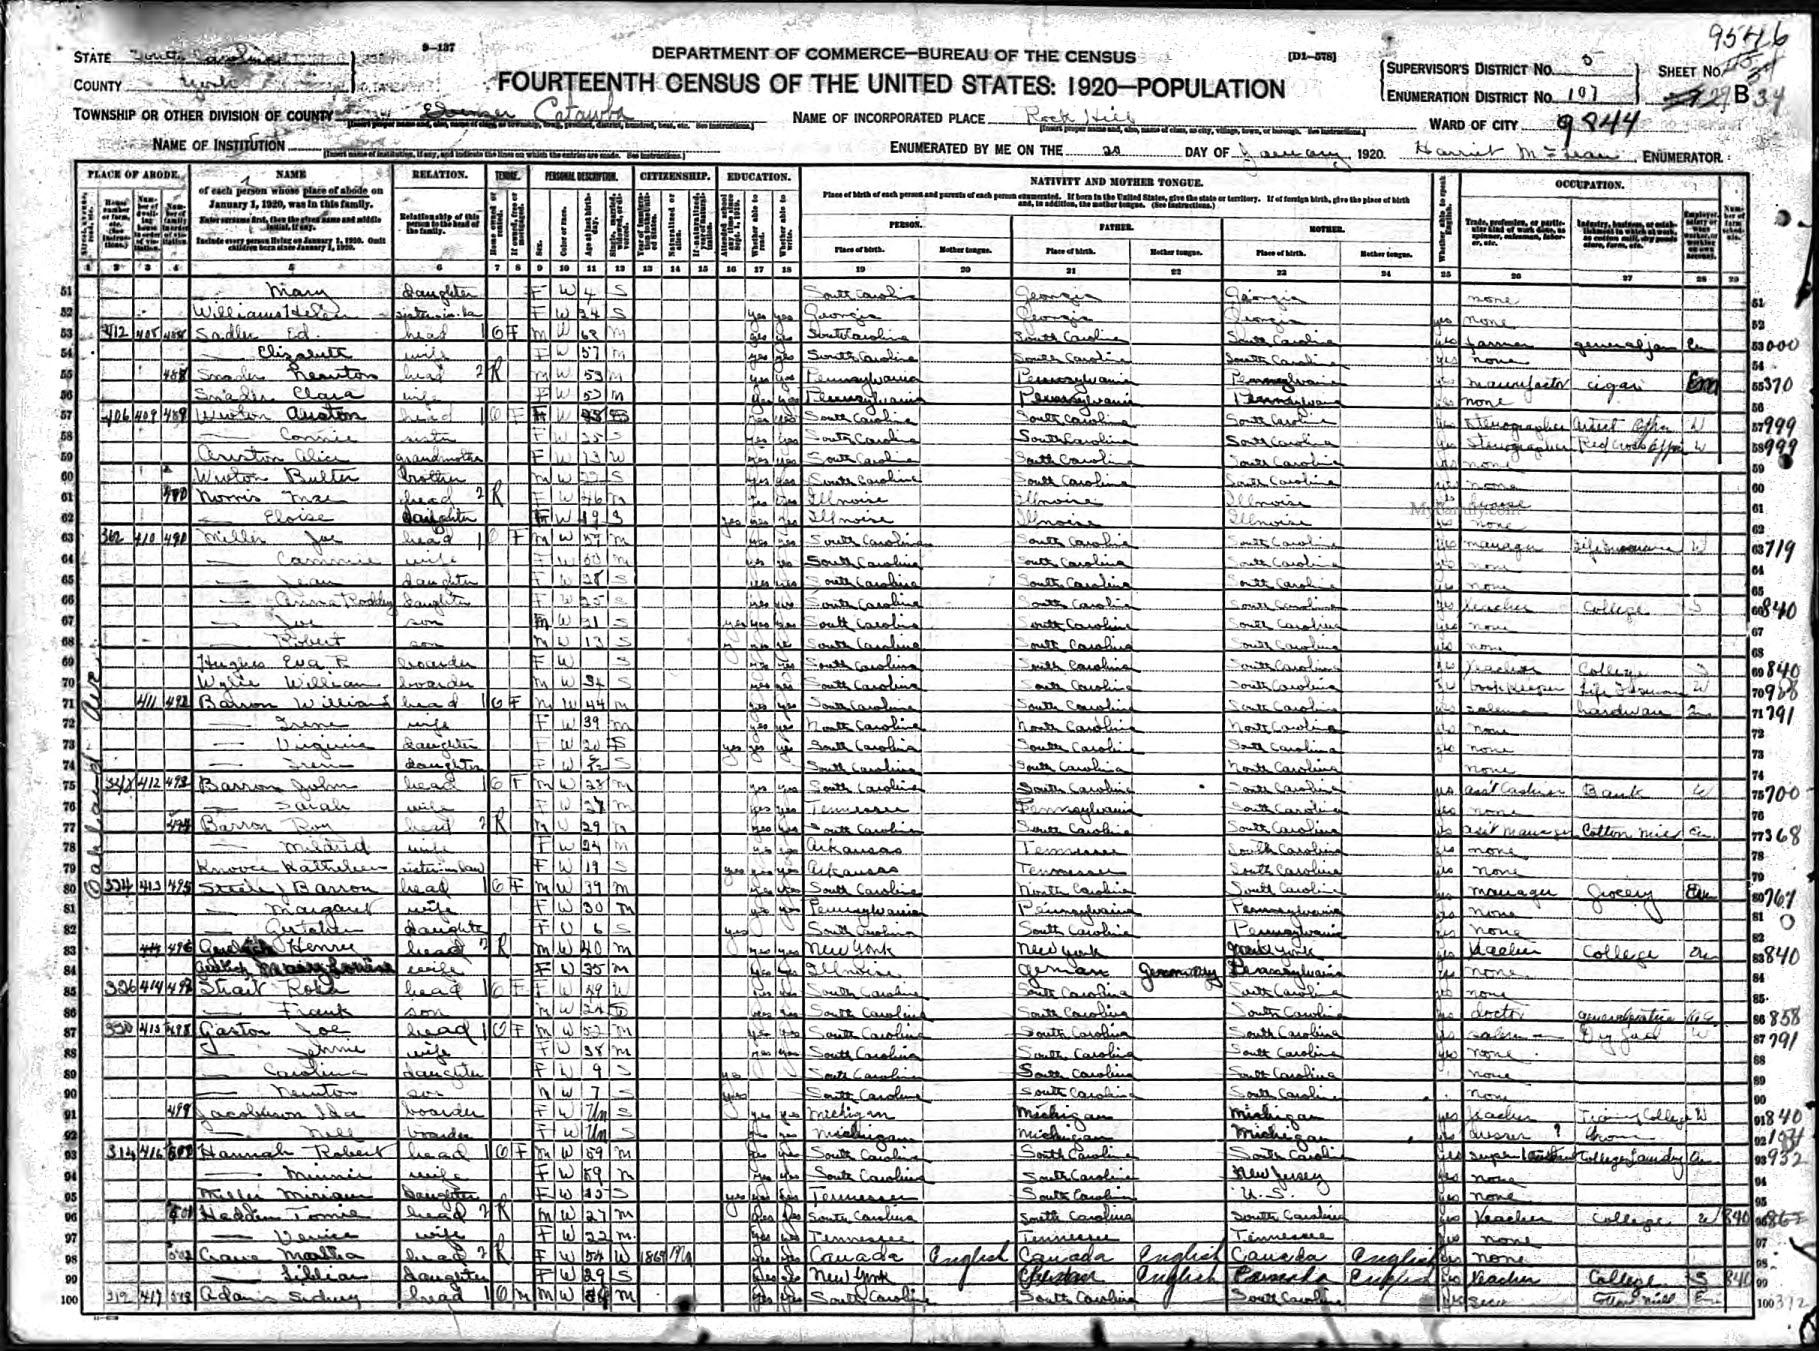 1920 CENSUS DATA ON OAKLAND AVE